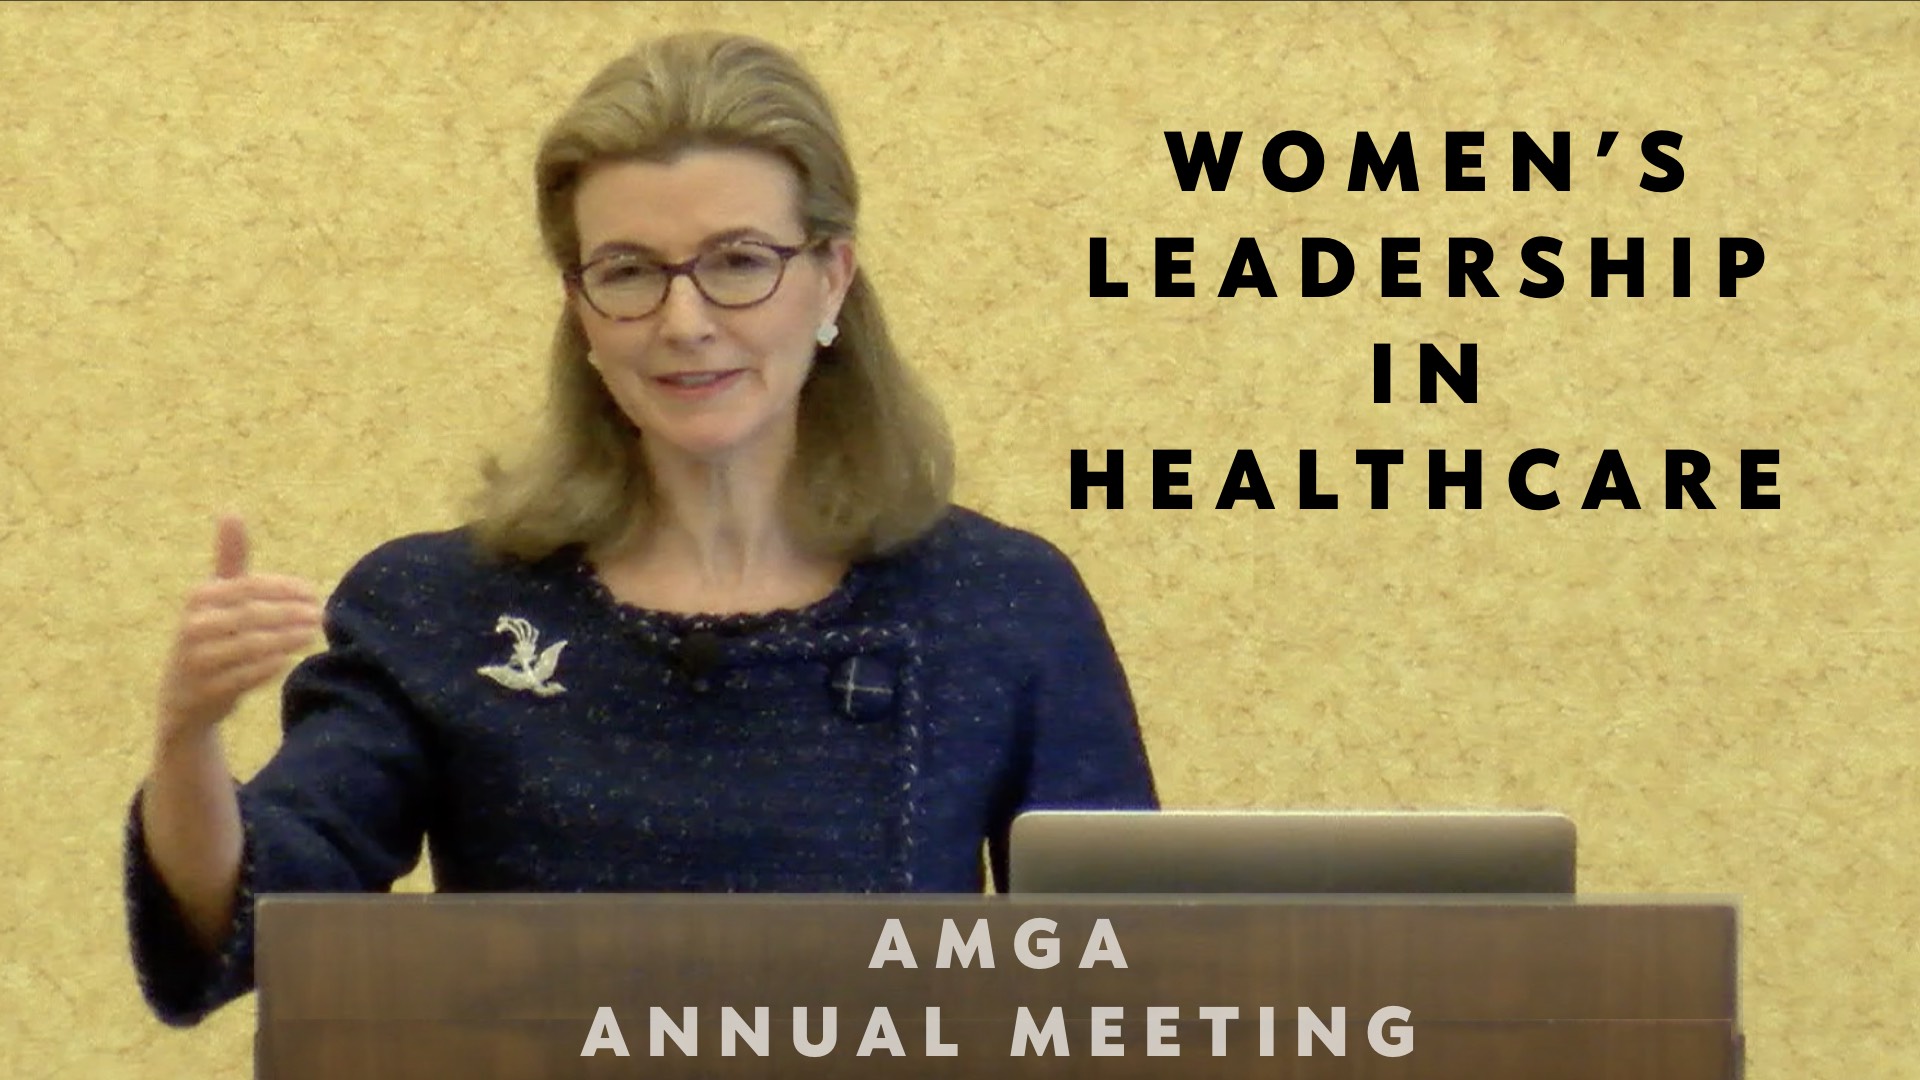 Addressing Gender Diversity Issues in the Healthcare Industry